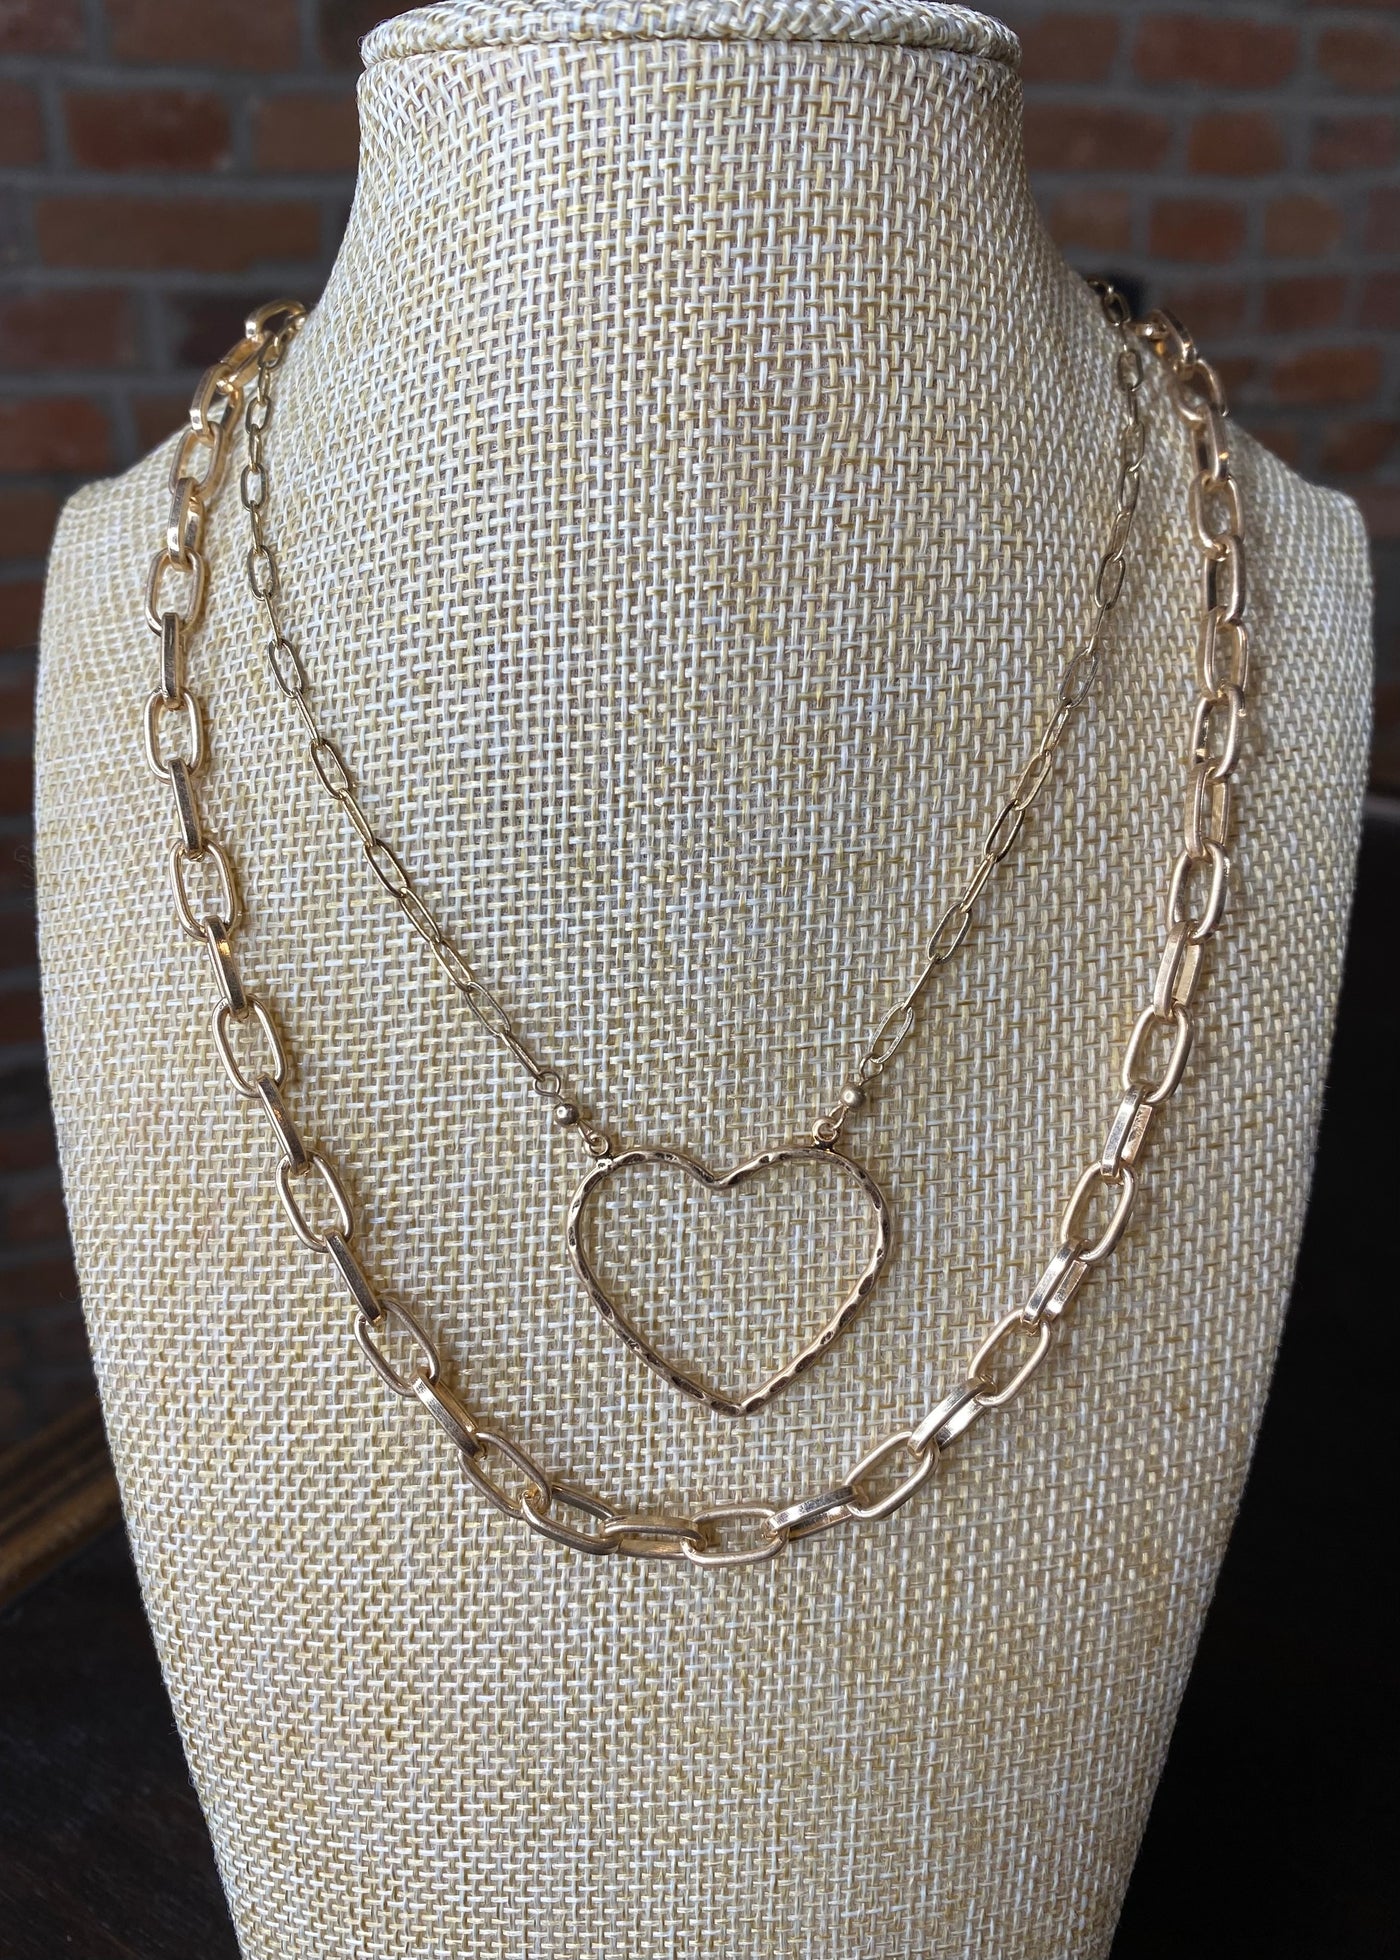 Gold Heart & Chain Necklace Set